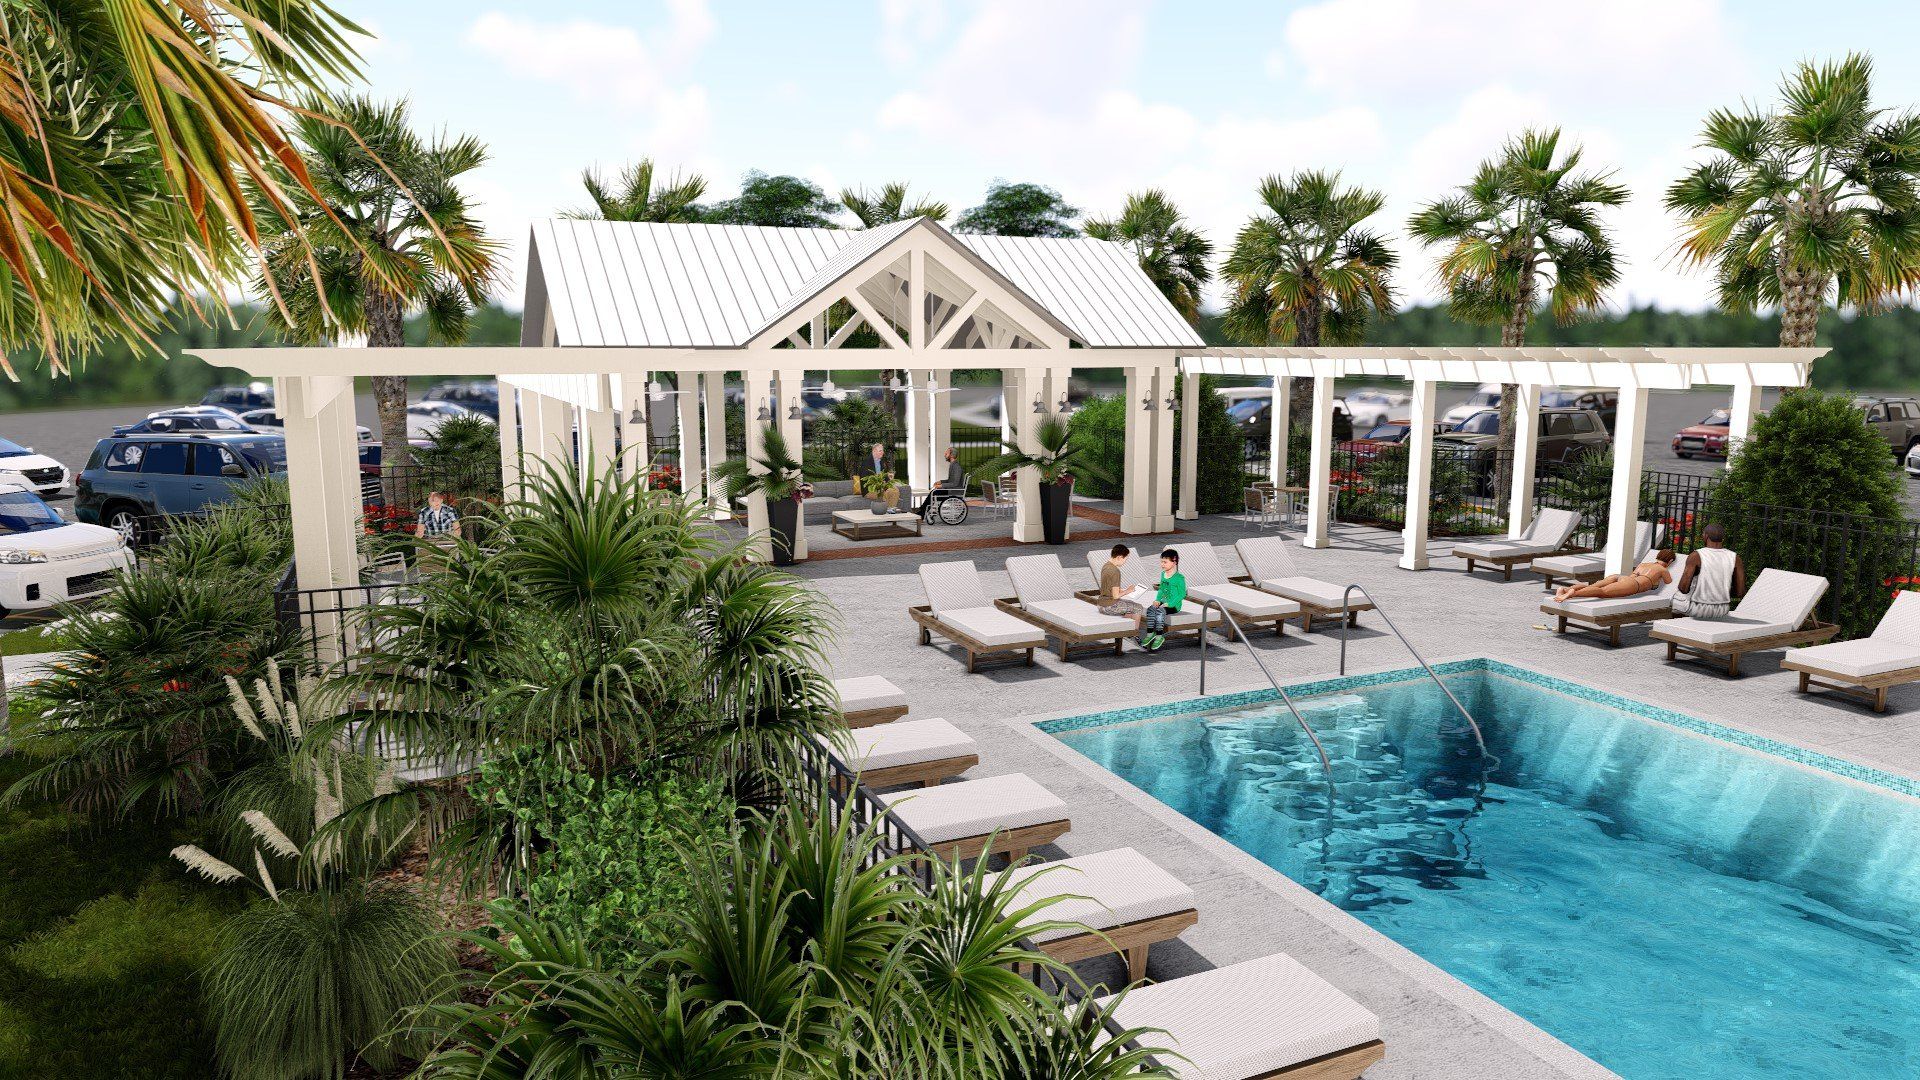 an artist 's impression of a swimming pool surrounded by chairs and palm trees .